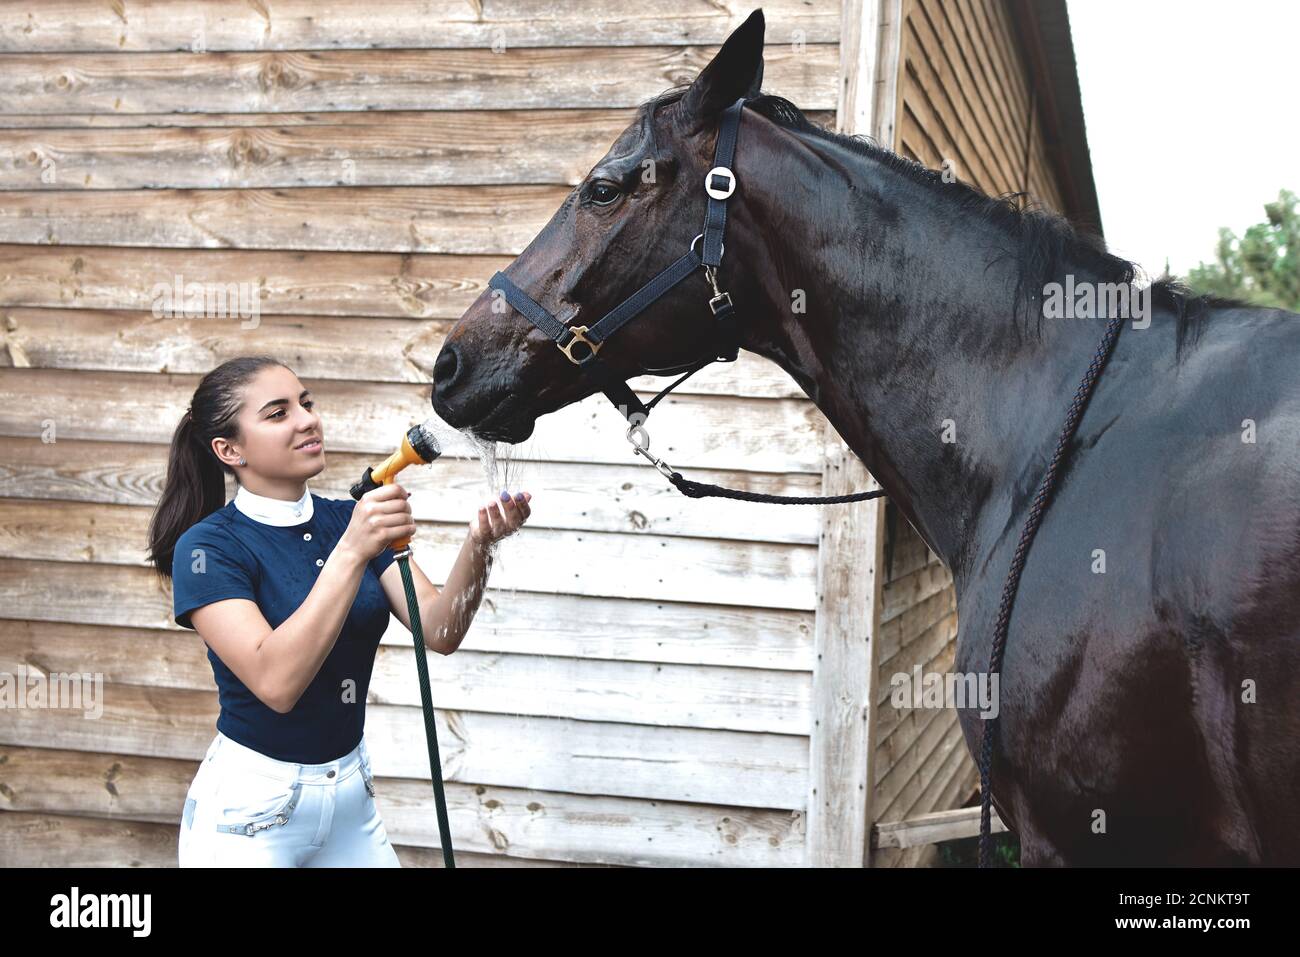 The process of washing the horse with water from a hose, preparing for the competition Stock Photo